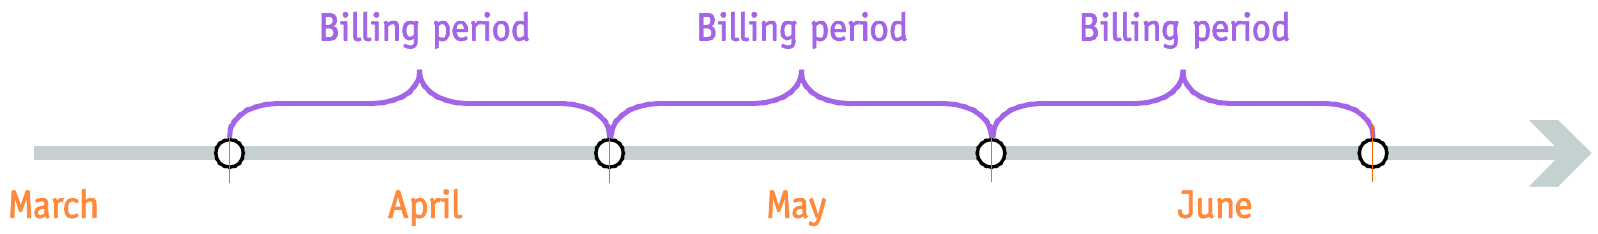 Monthly billing period